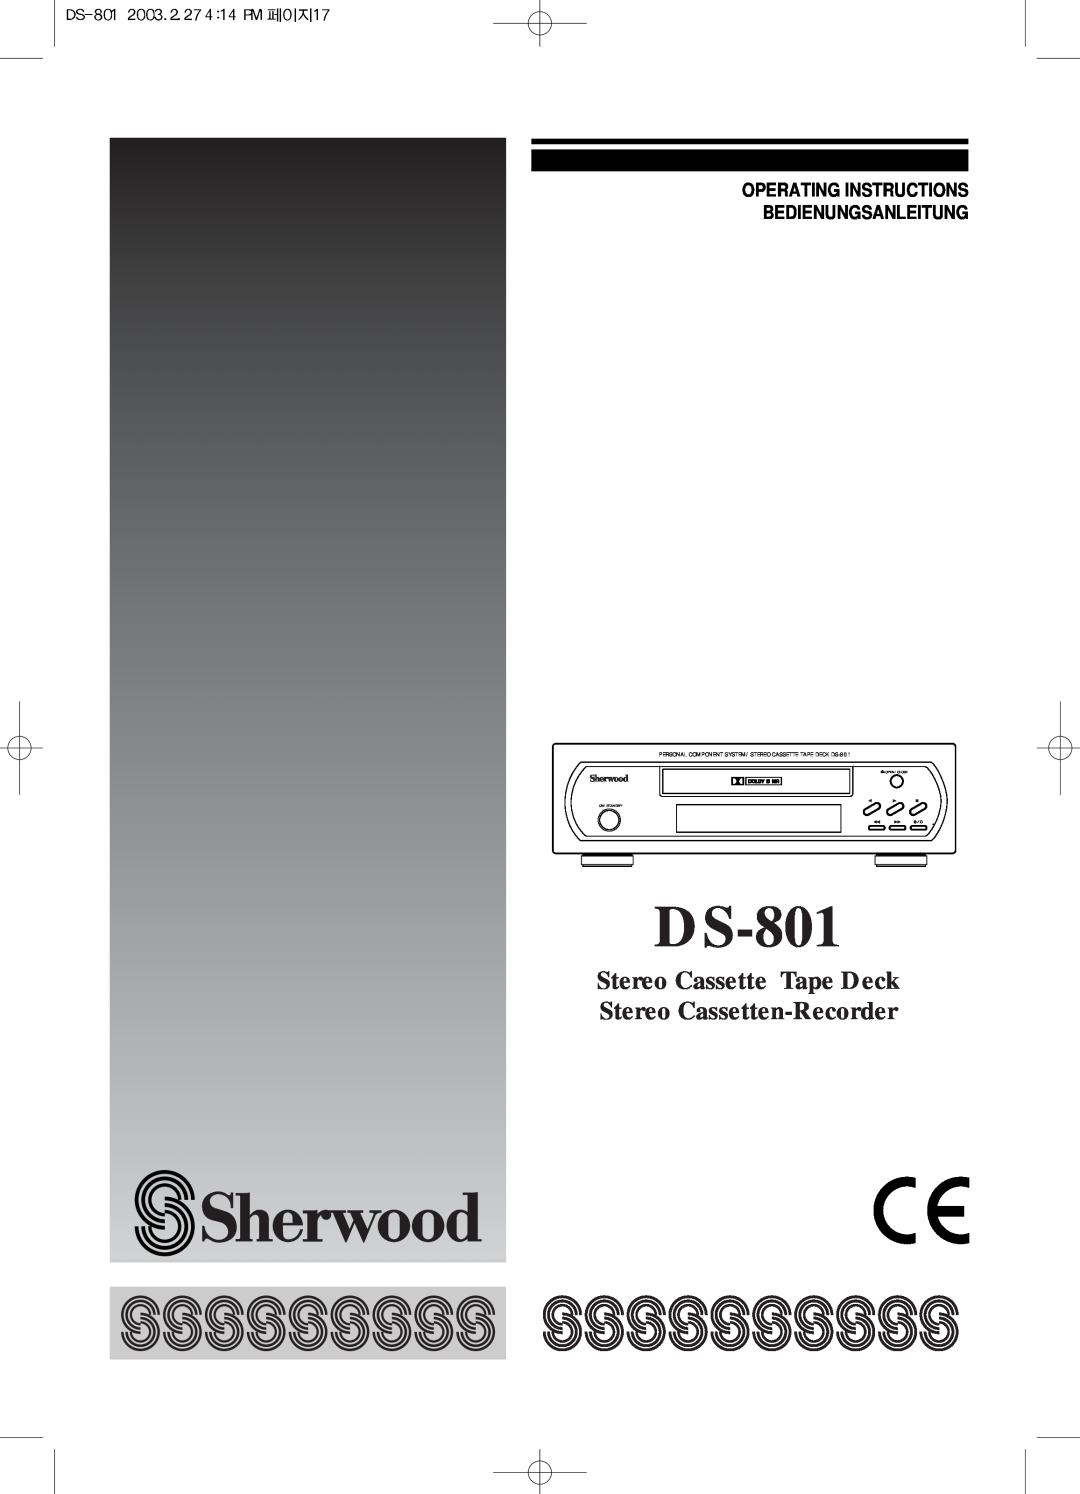 Sherwood DS-801 manual Operating Instructions Bedienungsanleitung 